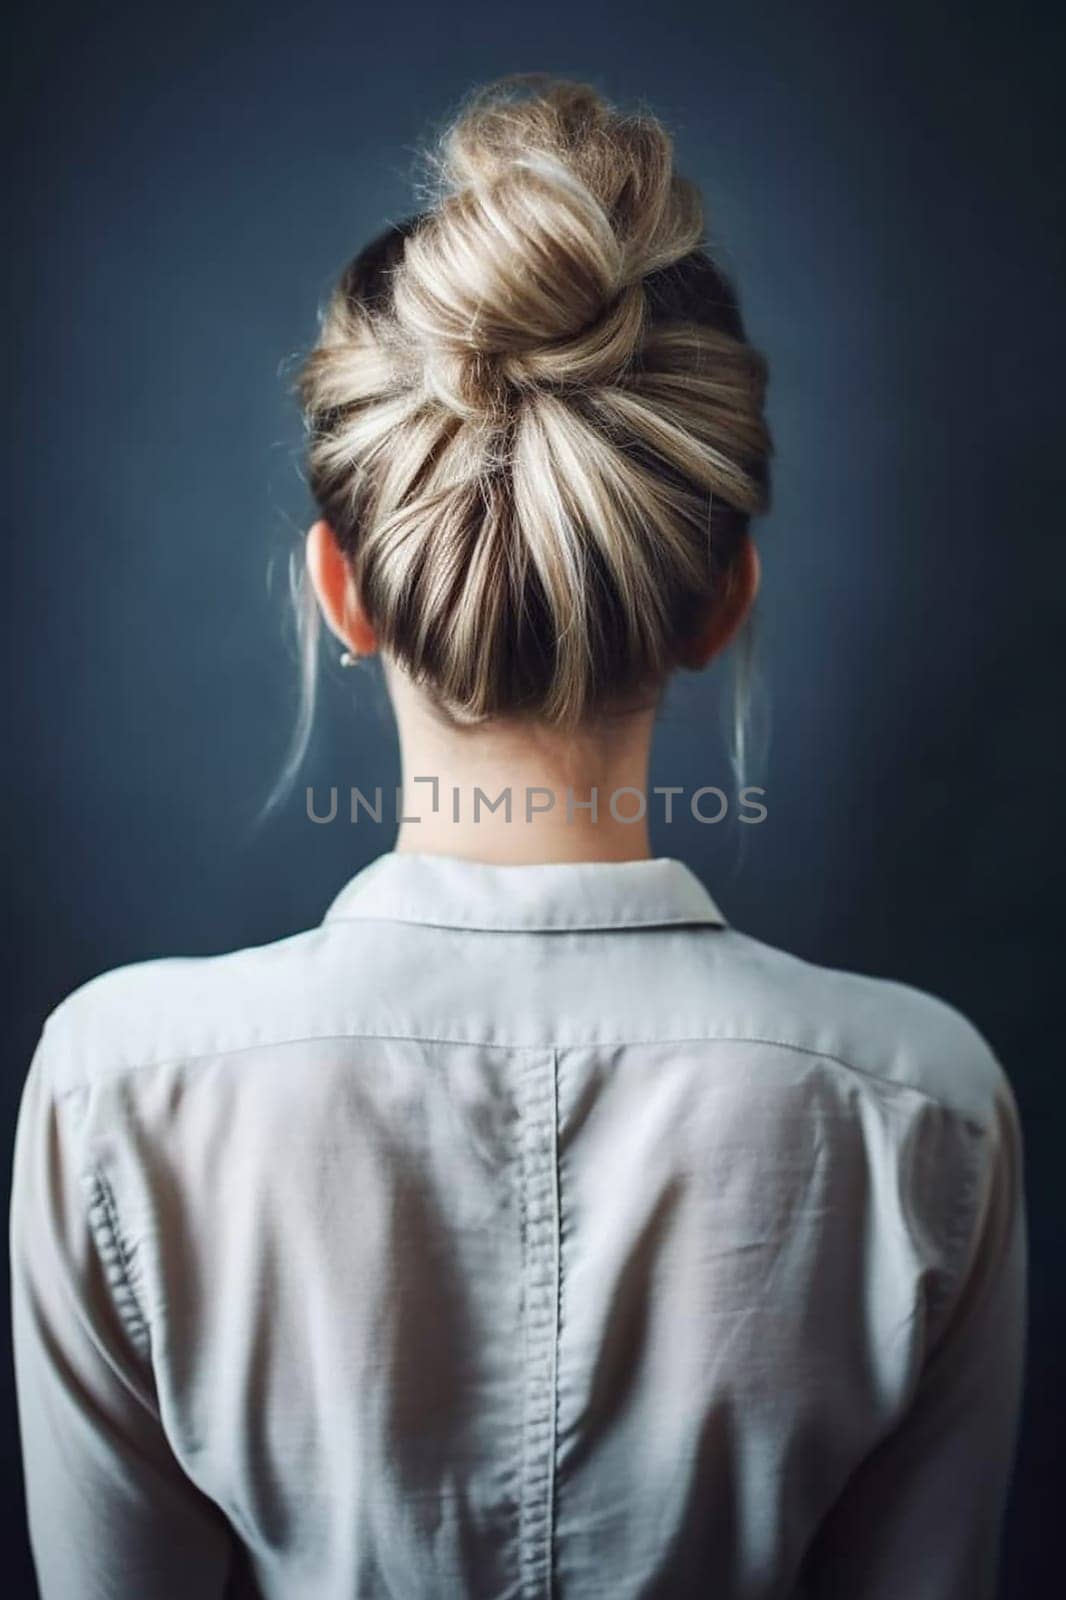 Elegant hairstyle with a neatly done bun on a person with light toned hair by Hype2art